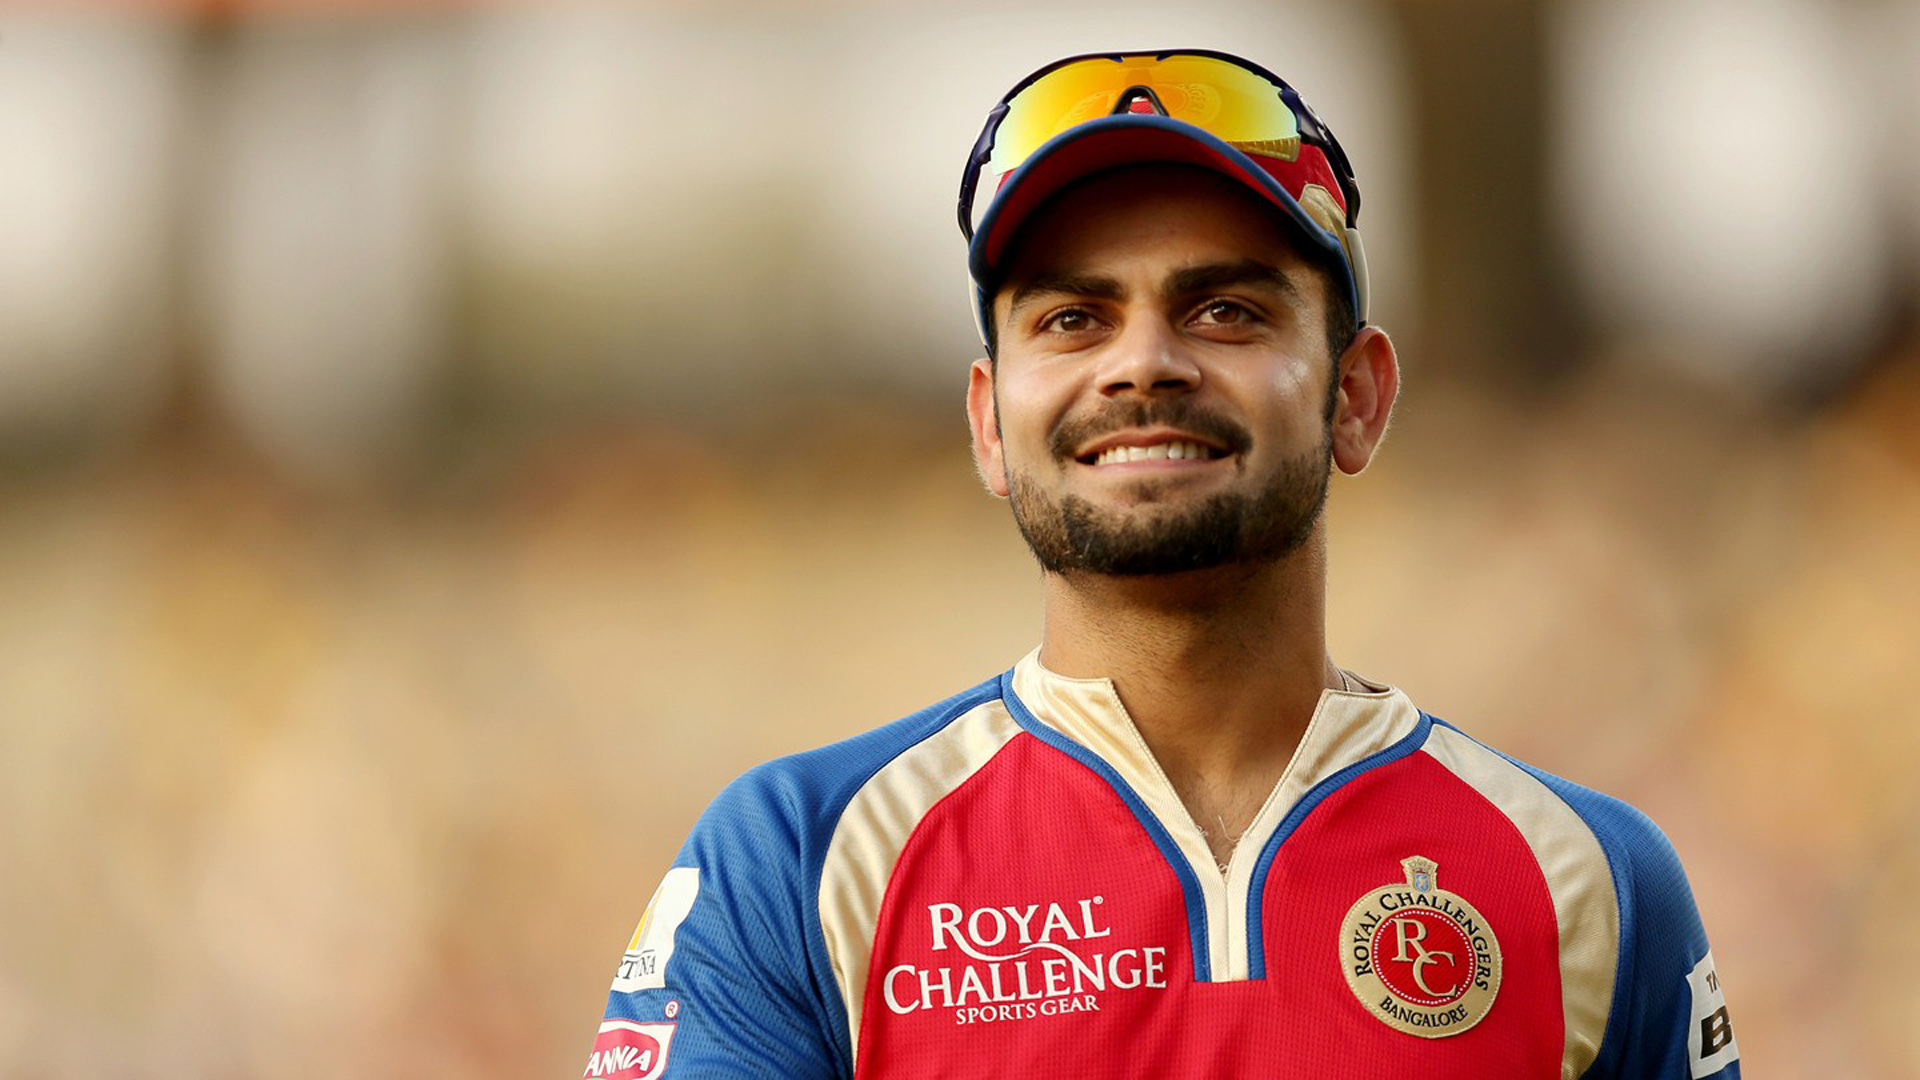 Virat Kohli has been referred to as one of the best players by cricket legends